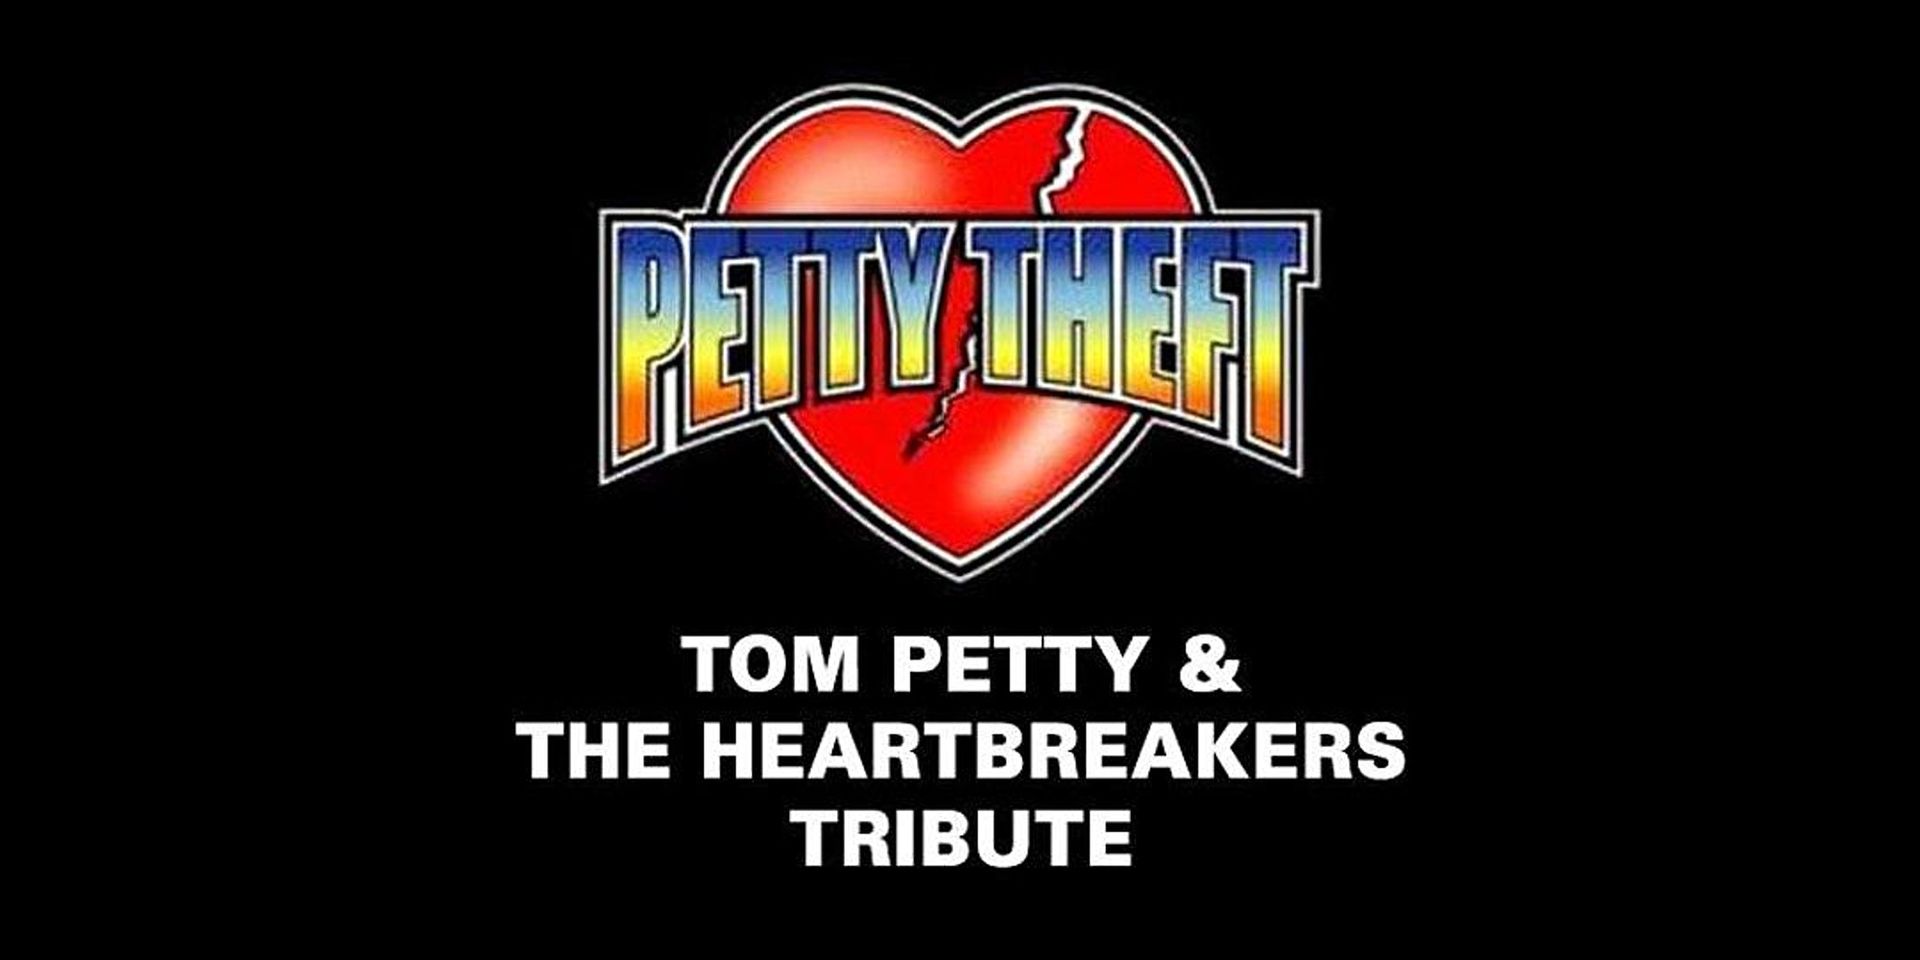 Tom Petty and the Heartbreakers Tribute: Petty Theft - hero